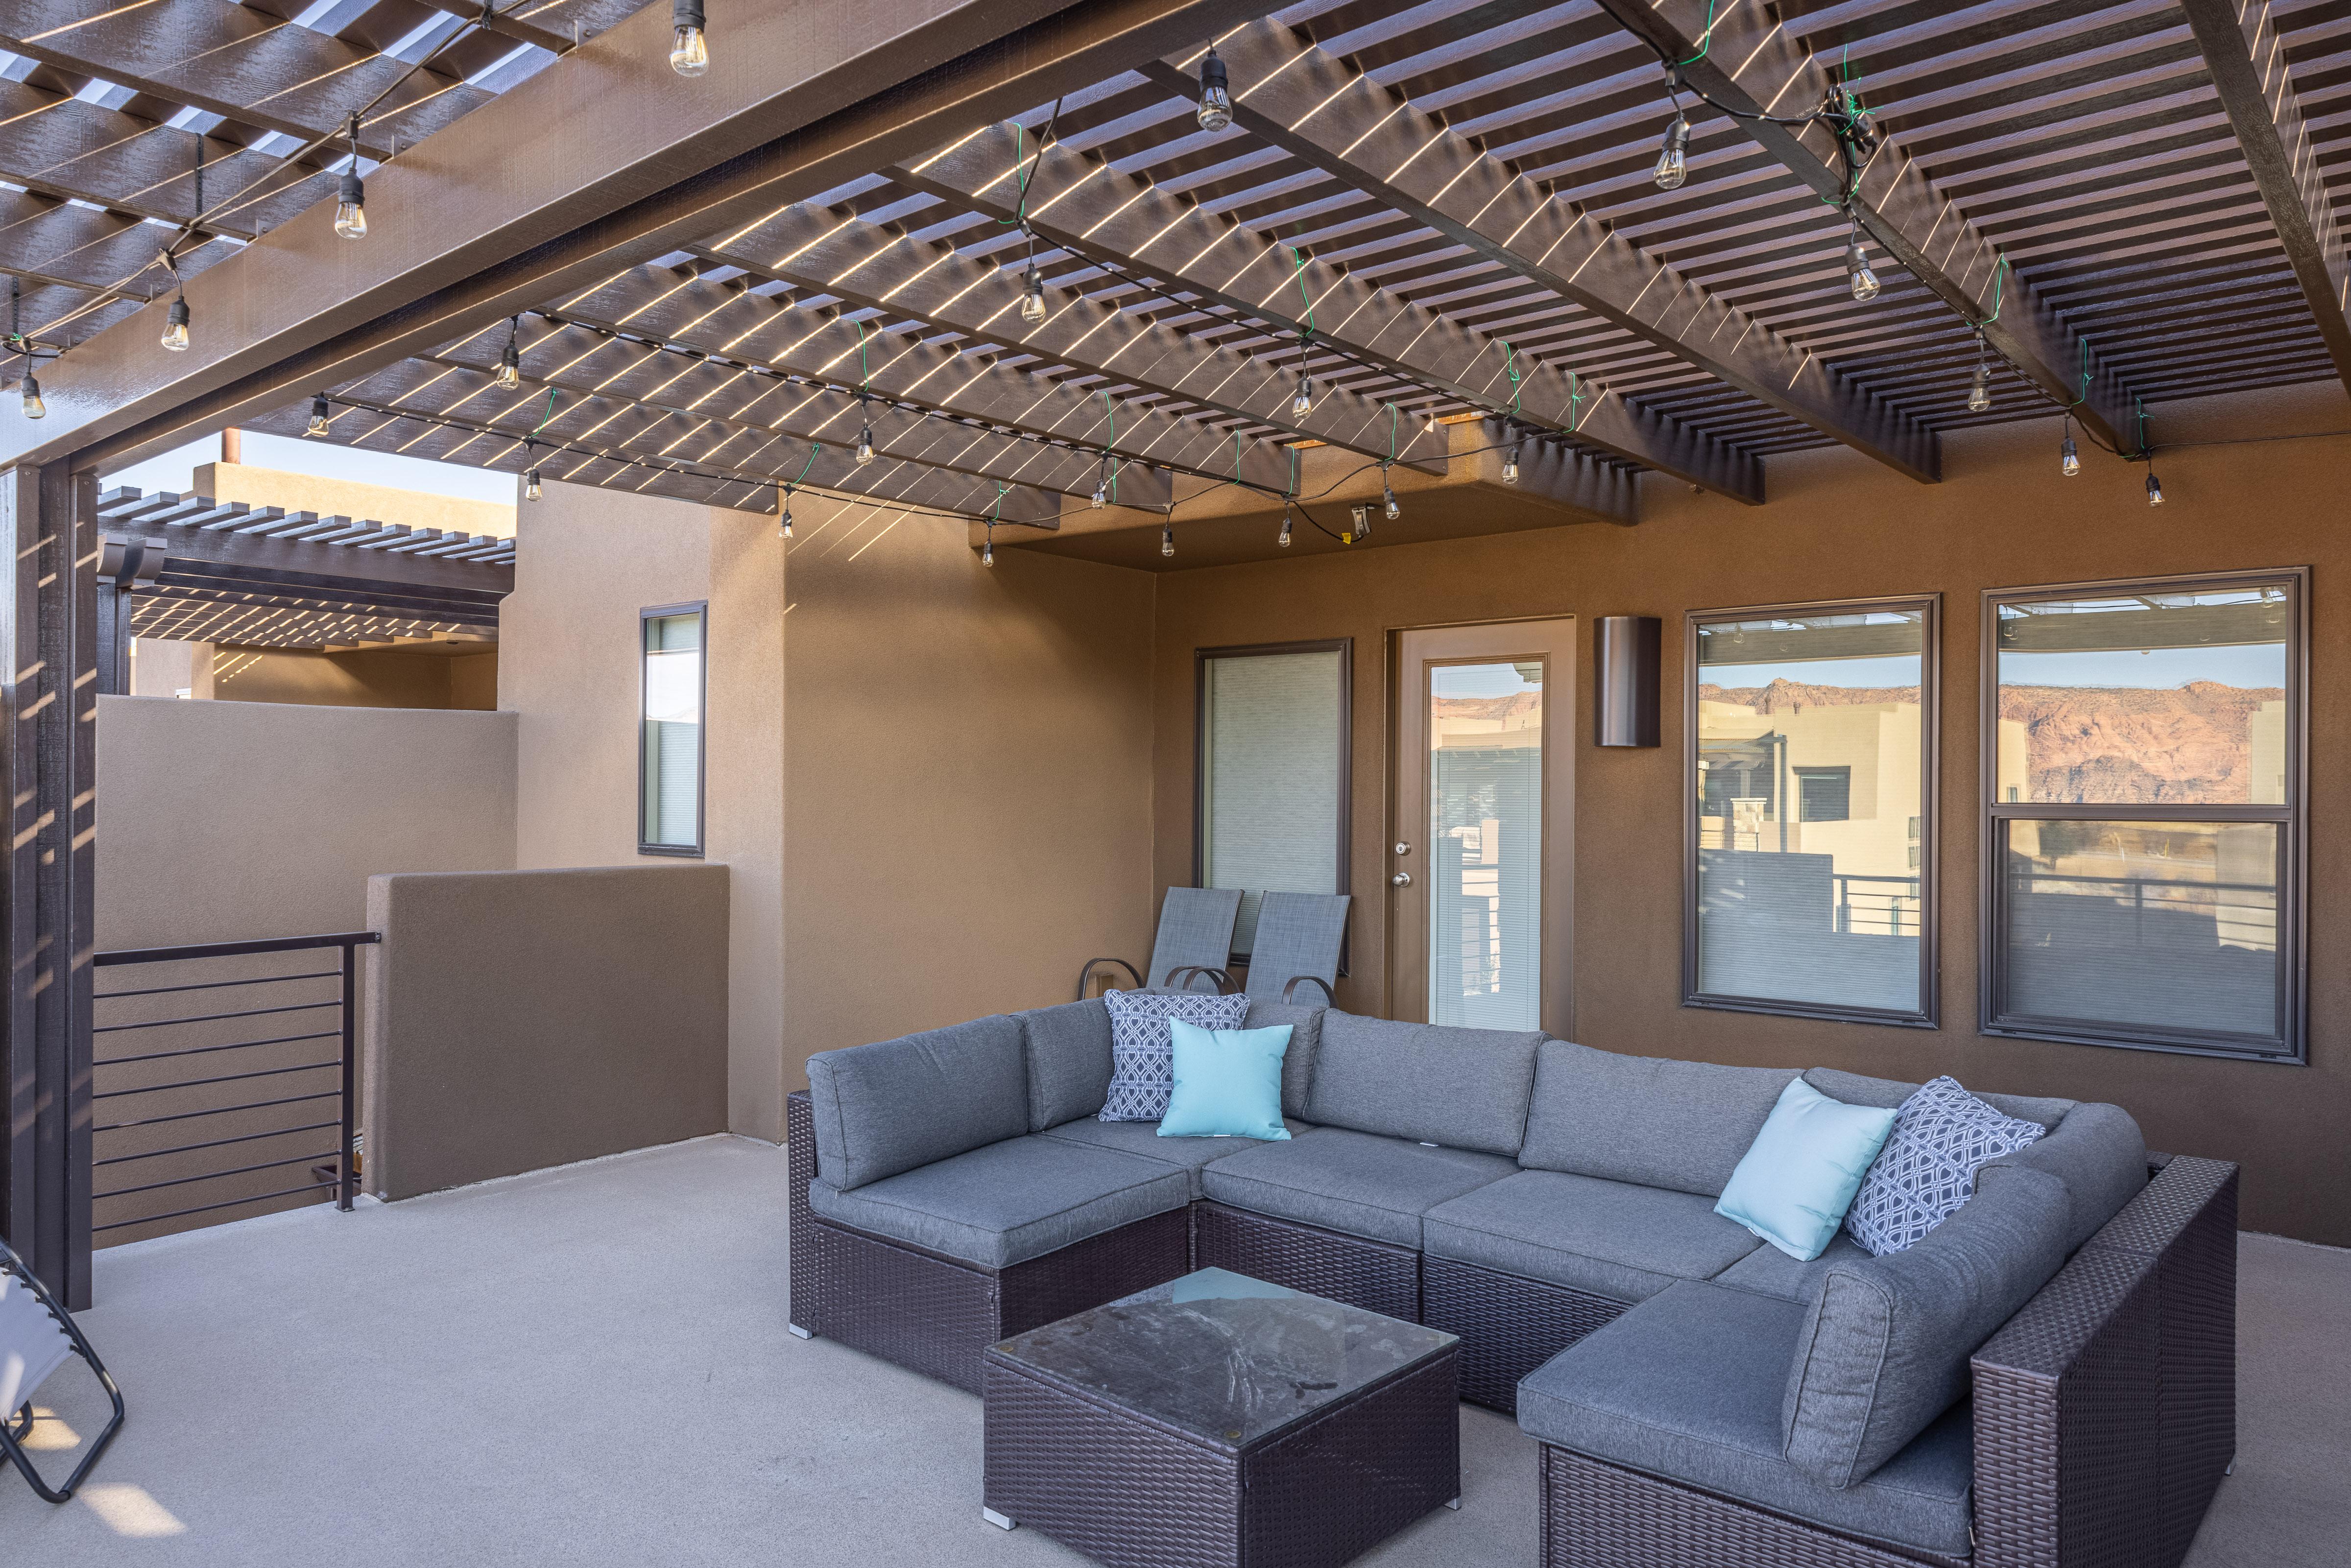 Read a book and enjoy the weather while you lounge around in the comfort on the upstairs patio area.